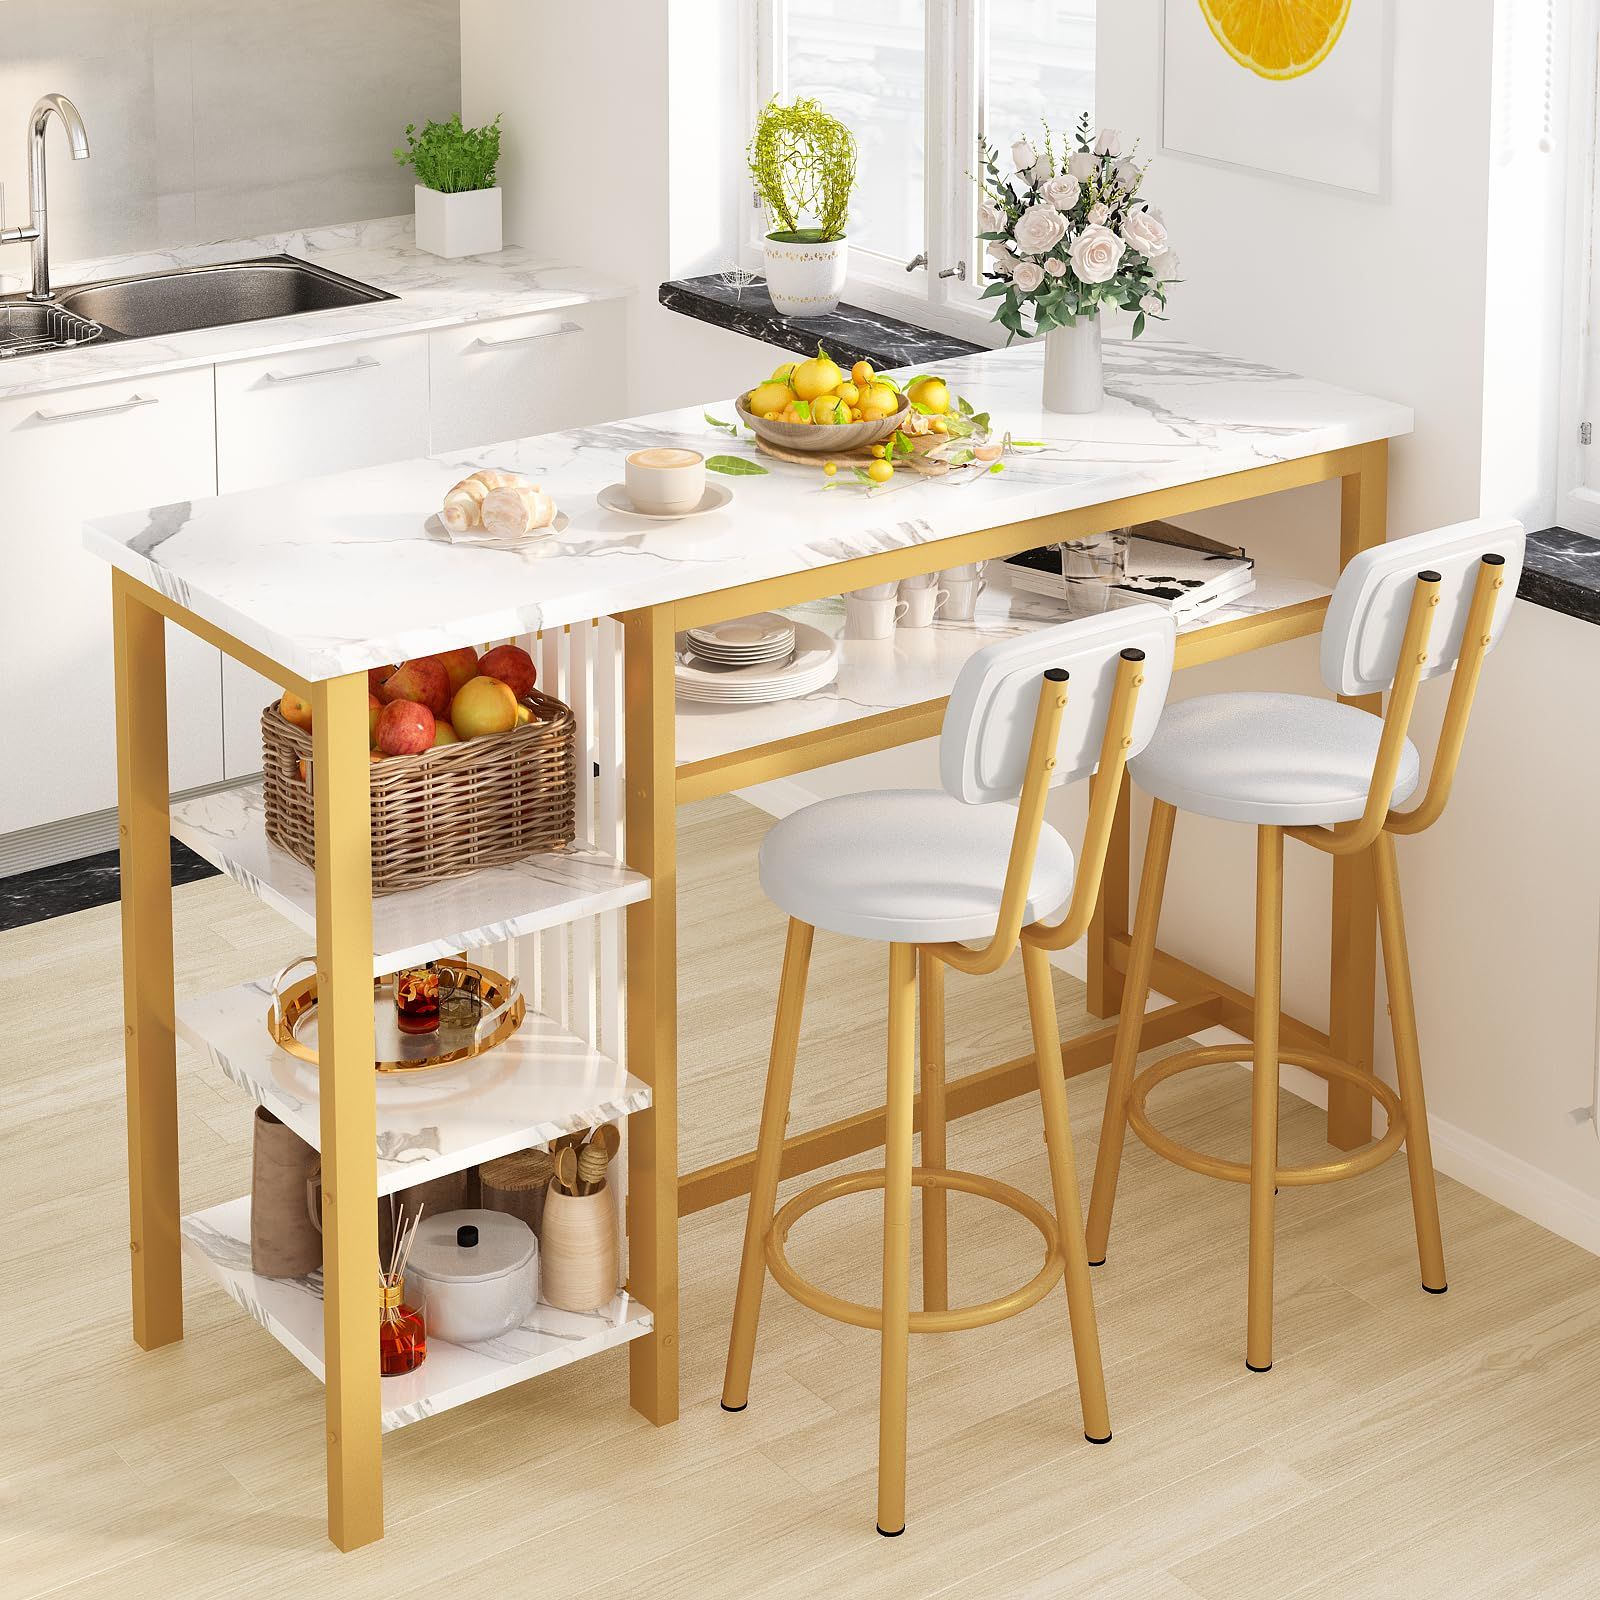 Space-Saving Solutions: The Best Kitchen Tables and Chairs for Small Kitchens